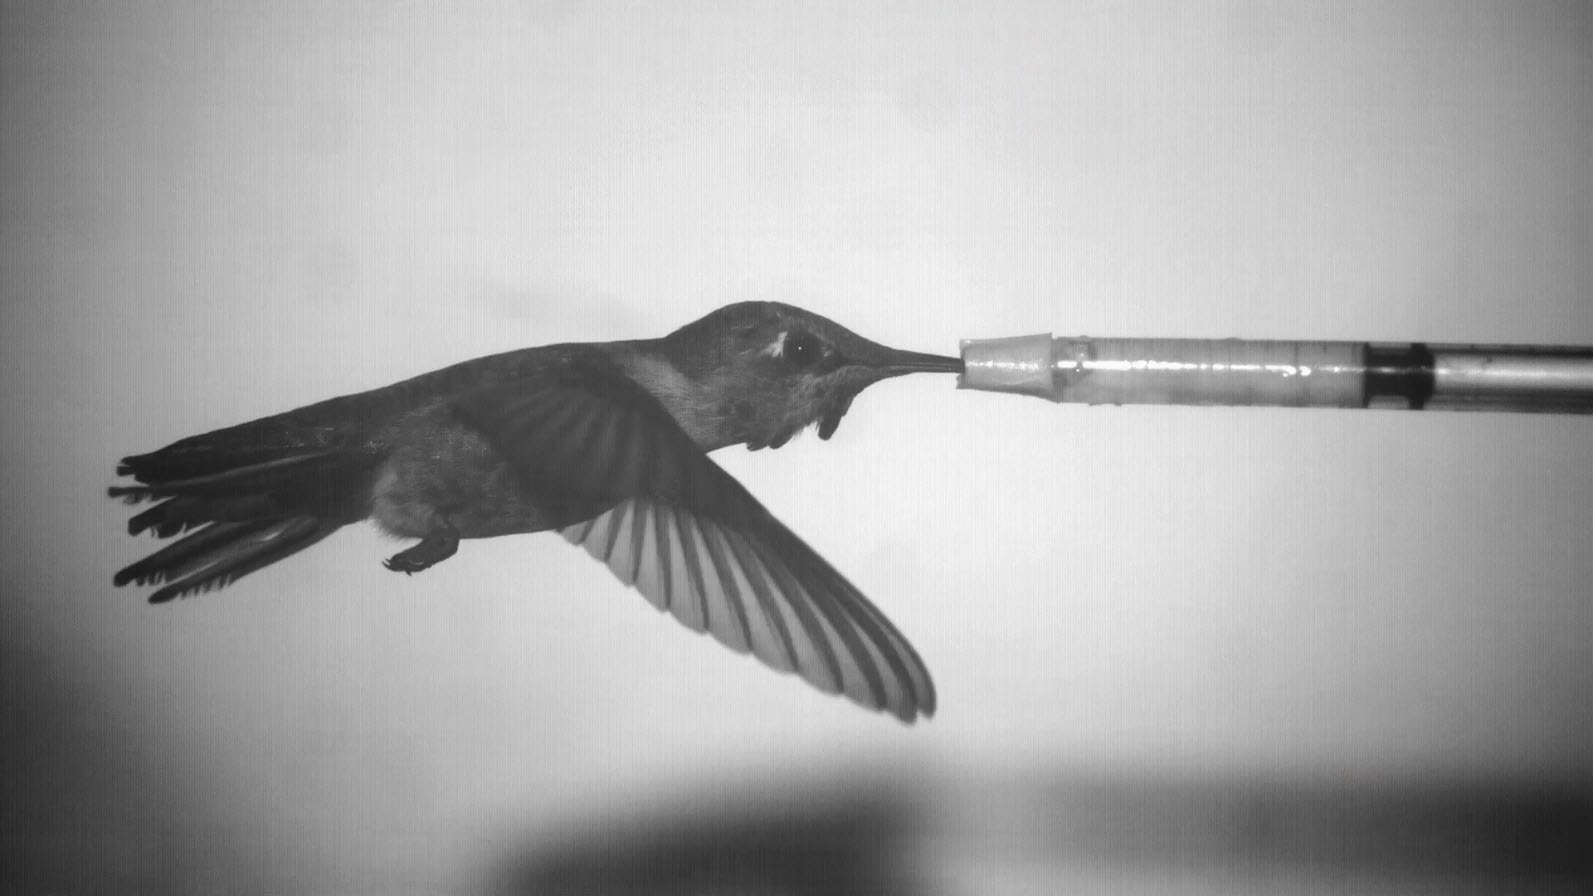 A framegrab from high-speed video of a hummingbird feeding in a wind tunnel at UC Berkeley. Image courtesy of Victor M. Ortega, UC Berkeley.